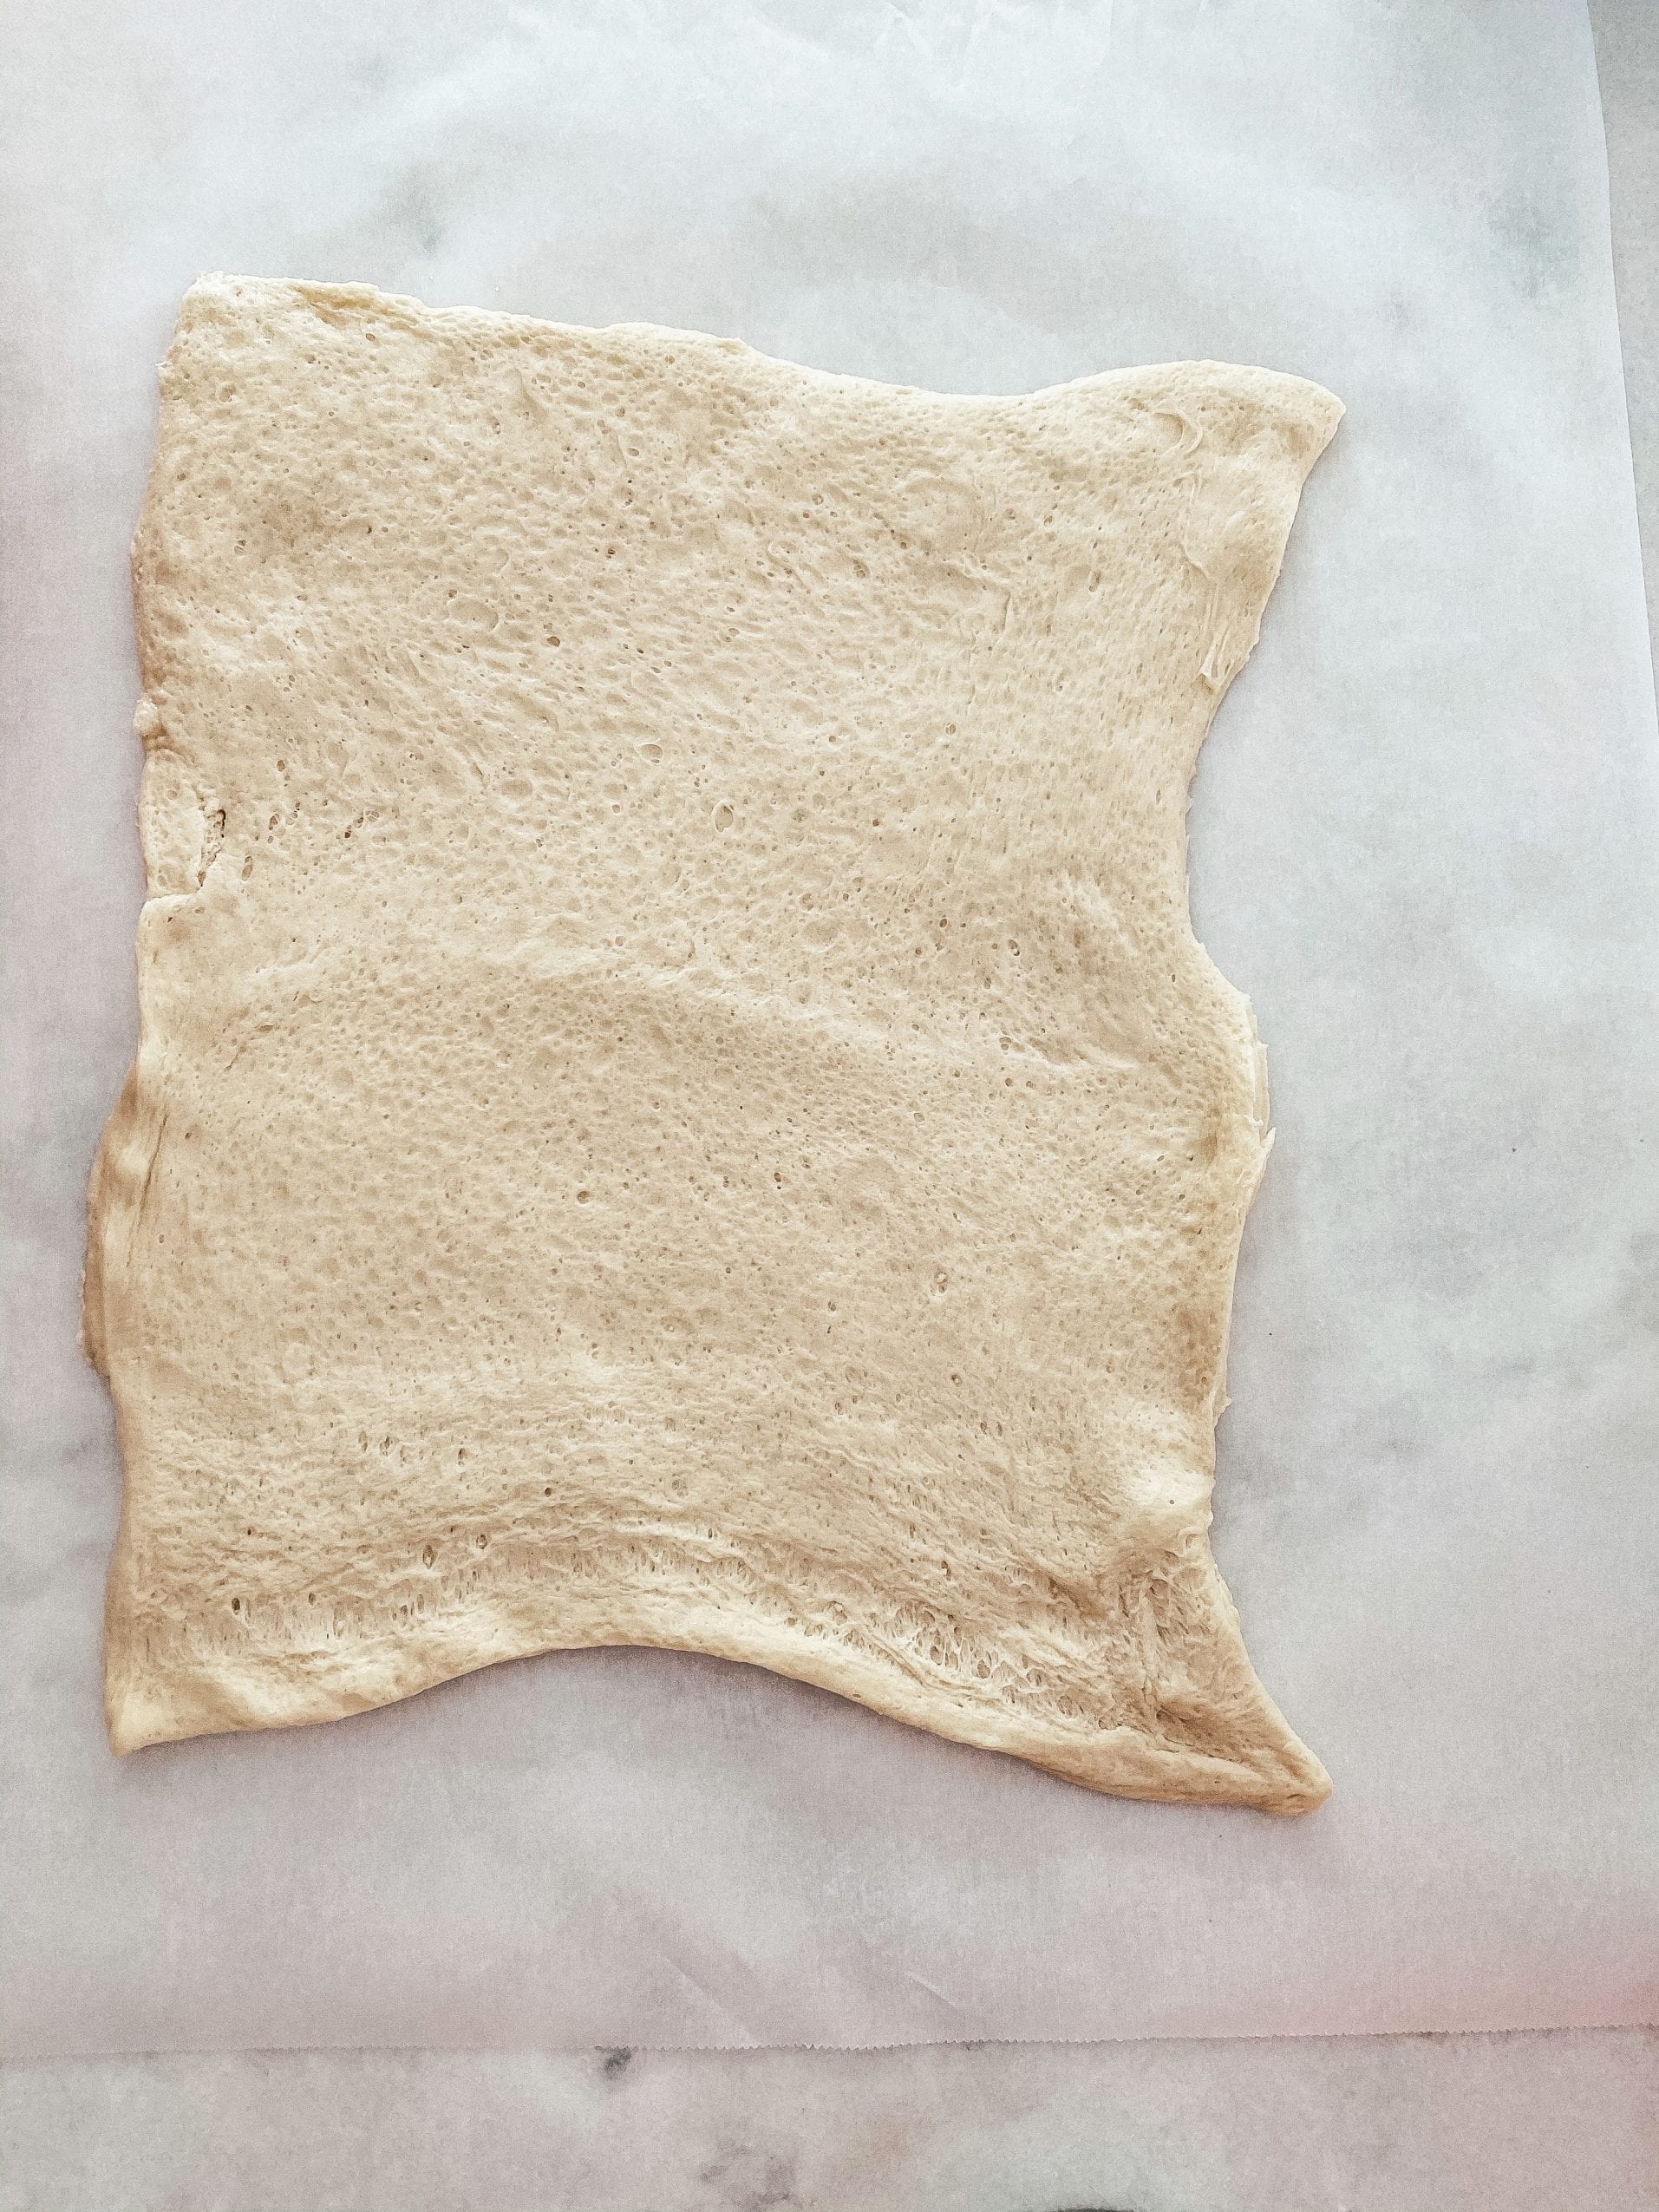 rolling out the pillsbury pizza dough